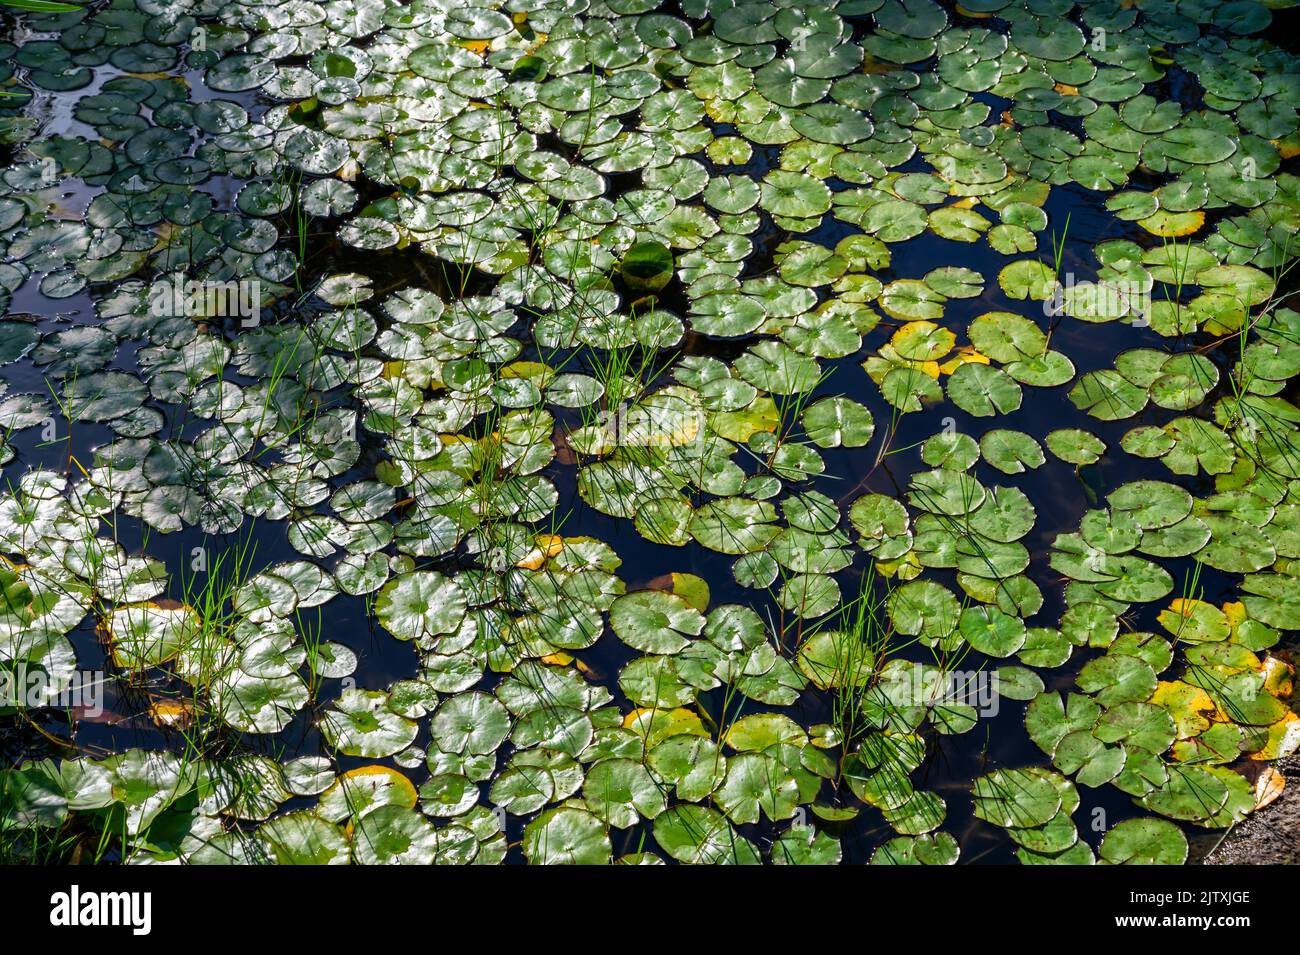 Small pond with many water lily leaves as a habitat for insects Stock Photo